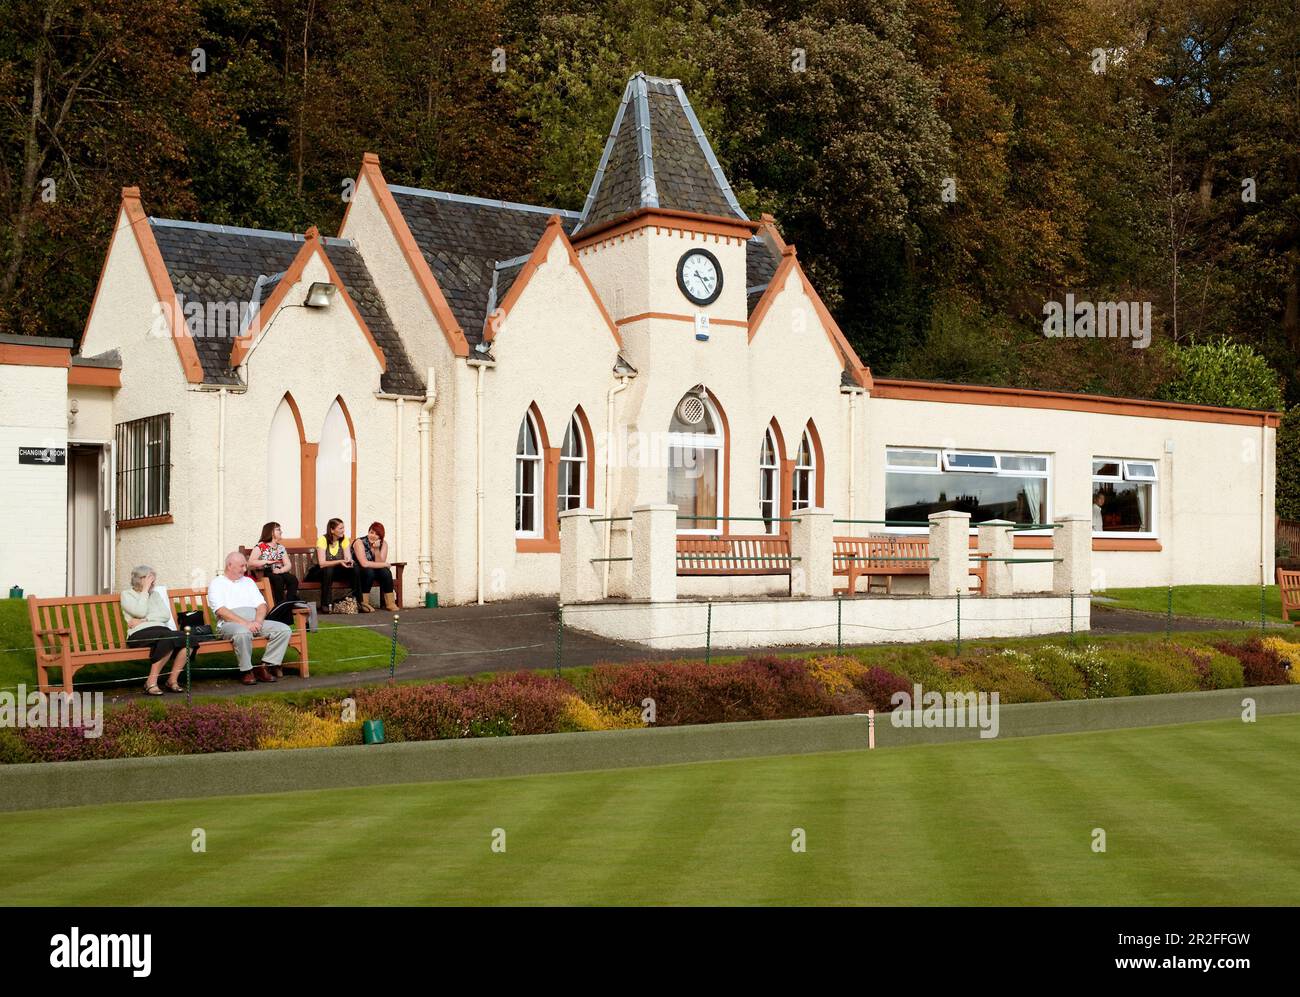 A crowd sit and watch bowls in play in front of the pavilion of the Stirling lawn bowling club green in Stirling, Scotland, UK Stock Photo